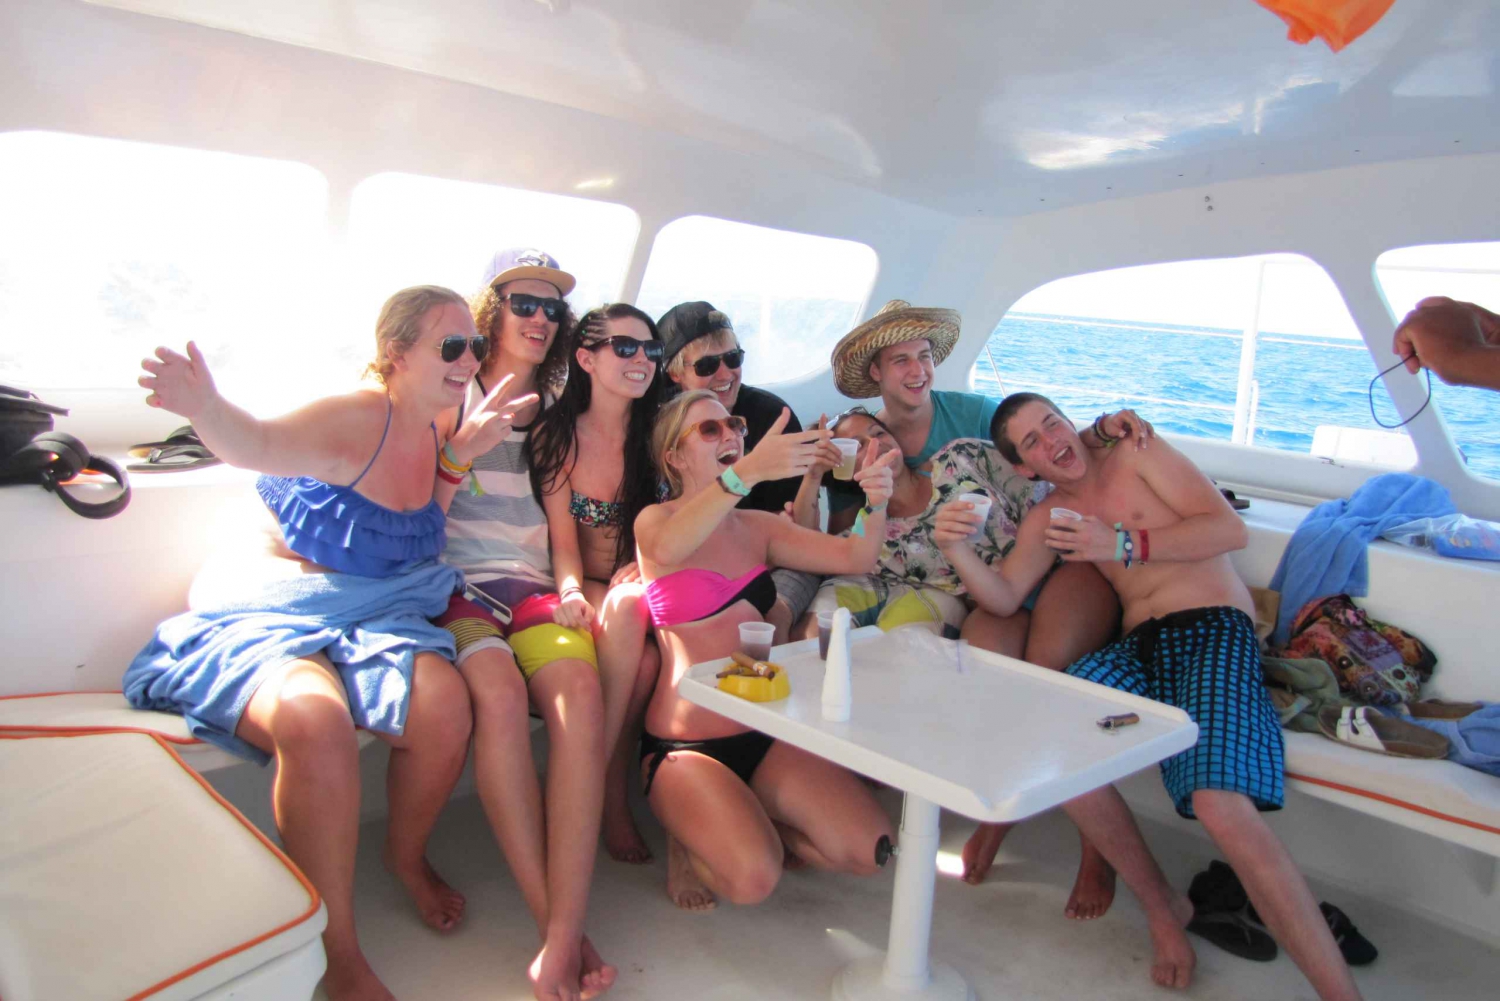 Half Day Party Boat and Snorkeling in Punta Cana